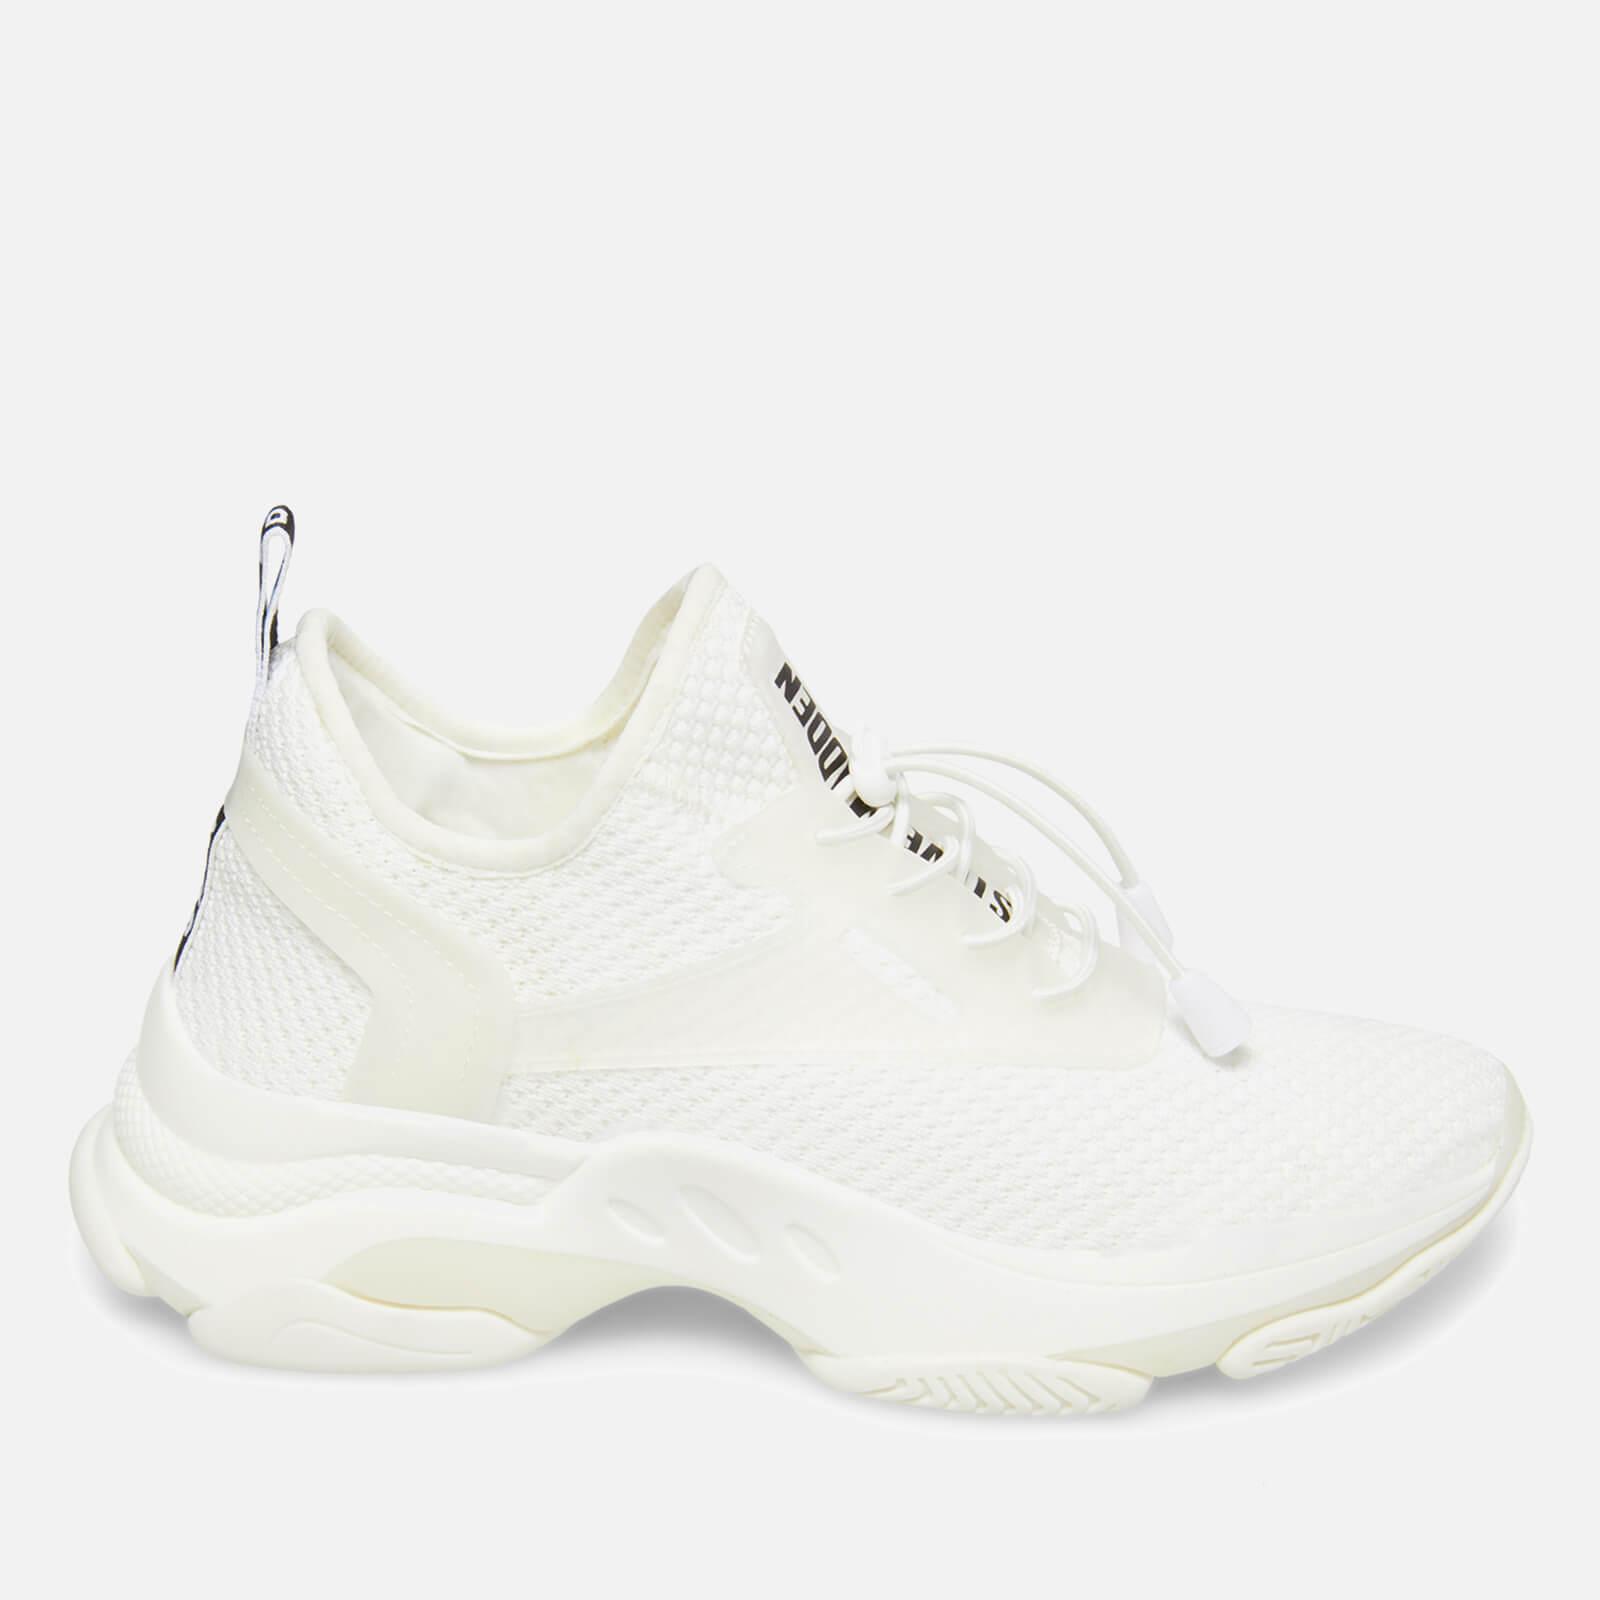 Steve Madden Match Mesh Running-style Trainers in White | Lyst